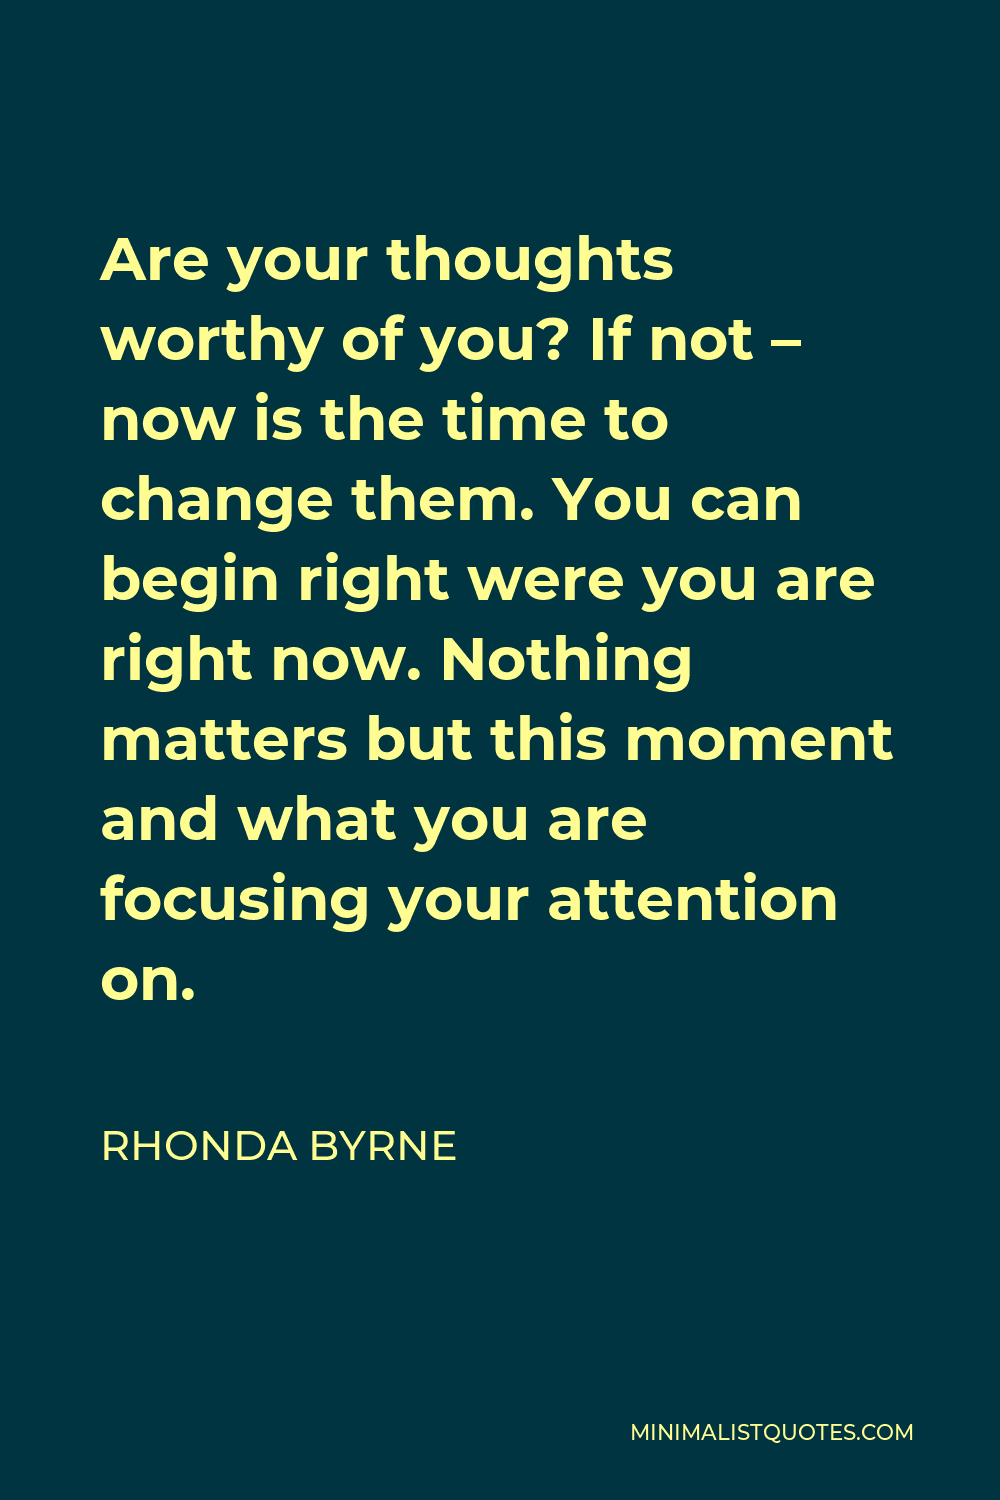 Rhonda Byrne Quote - Are your thoughts worthy of you? If not – now is the time to change them. You can begin right were you are right now. Nothing matters but this moment and what you are focusing your attention on.